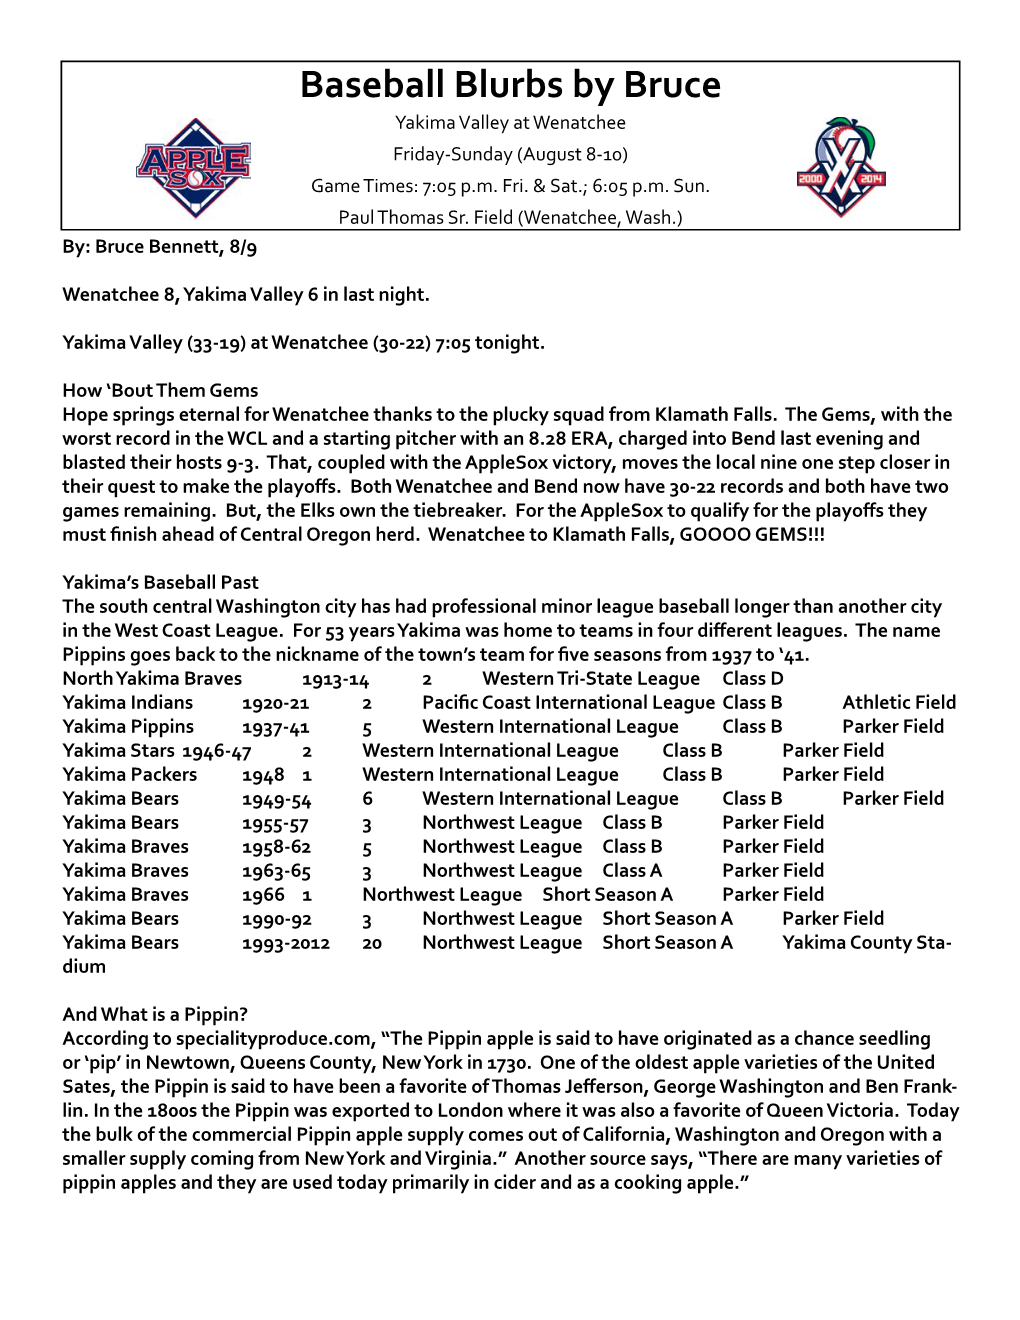 Baseball Blurbs by Bruce Yakima Valley at Wenatchee Friday-Sunday (August 8-10) Game Times: 7:05 P.M